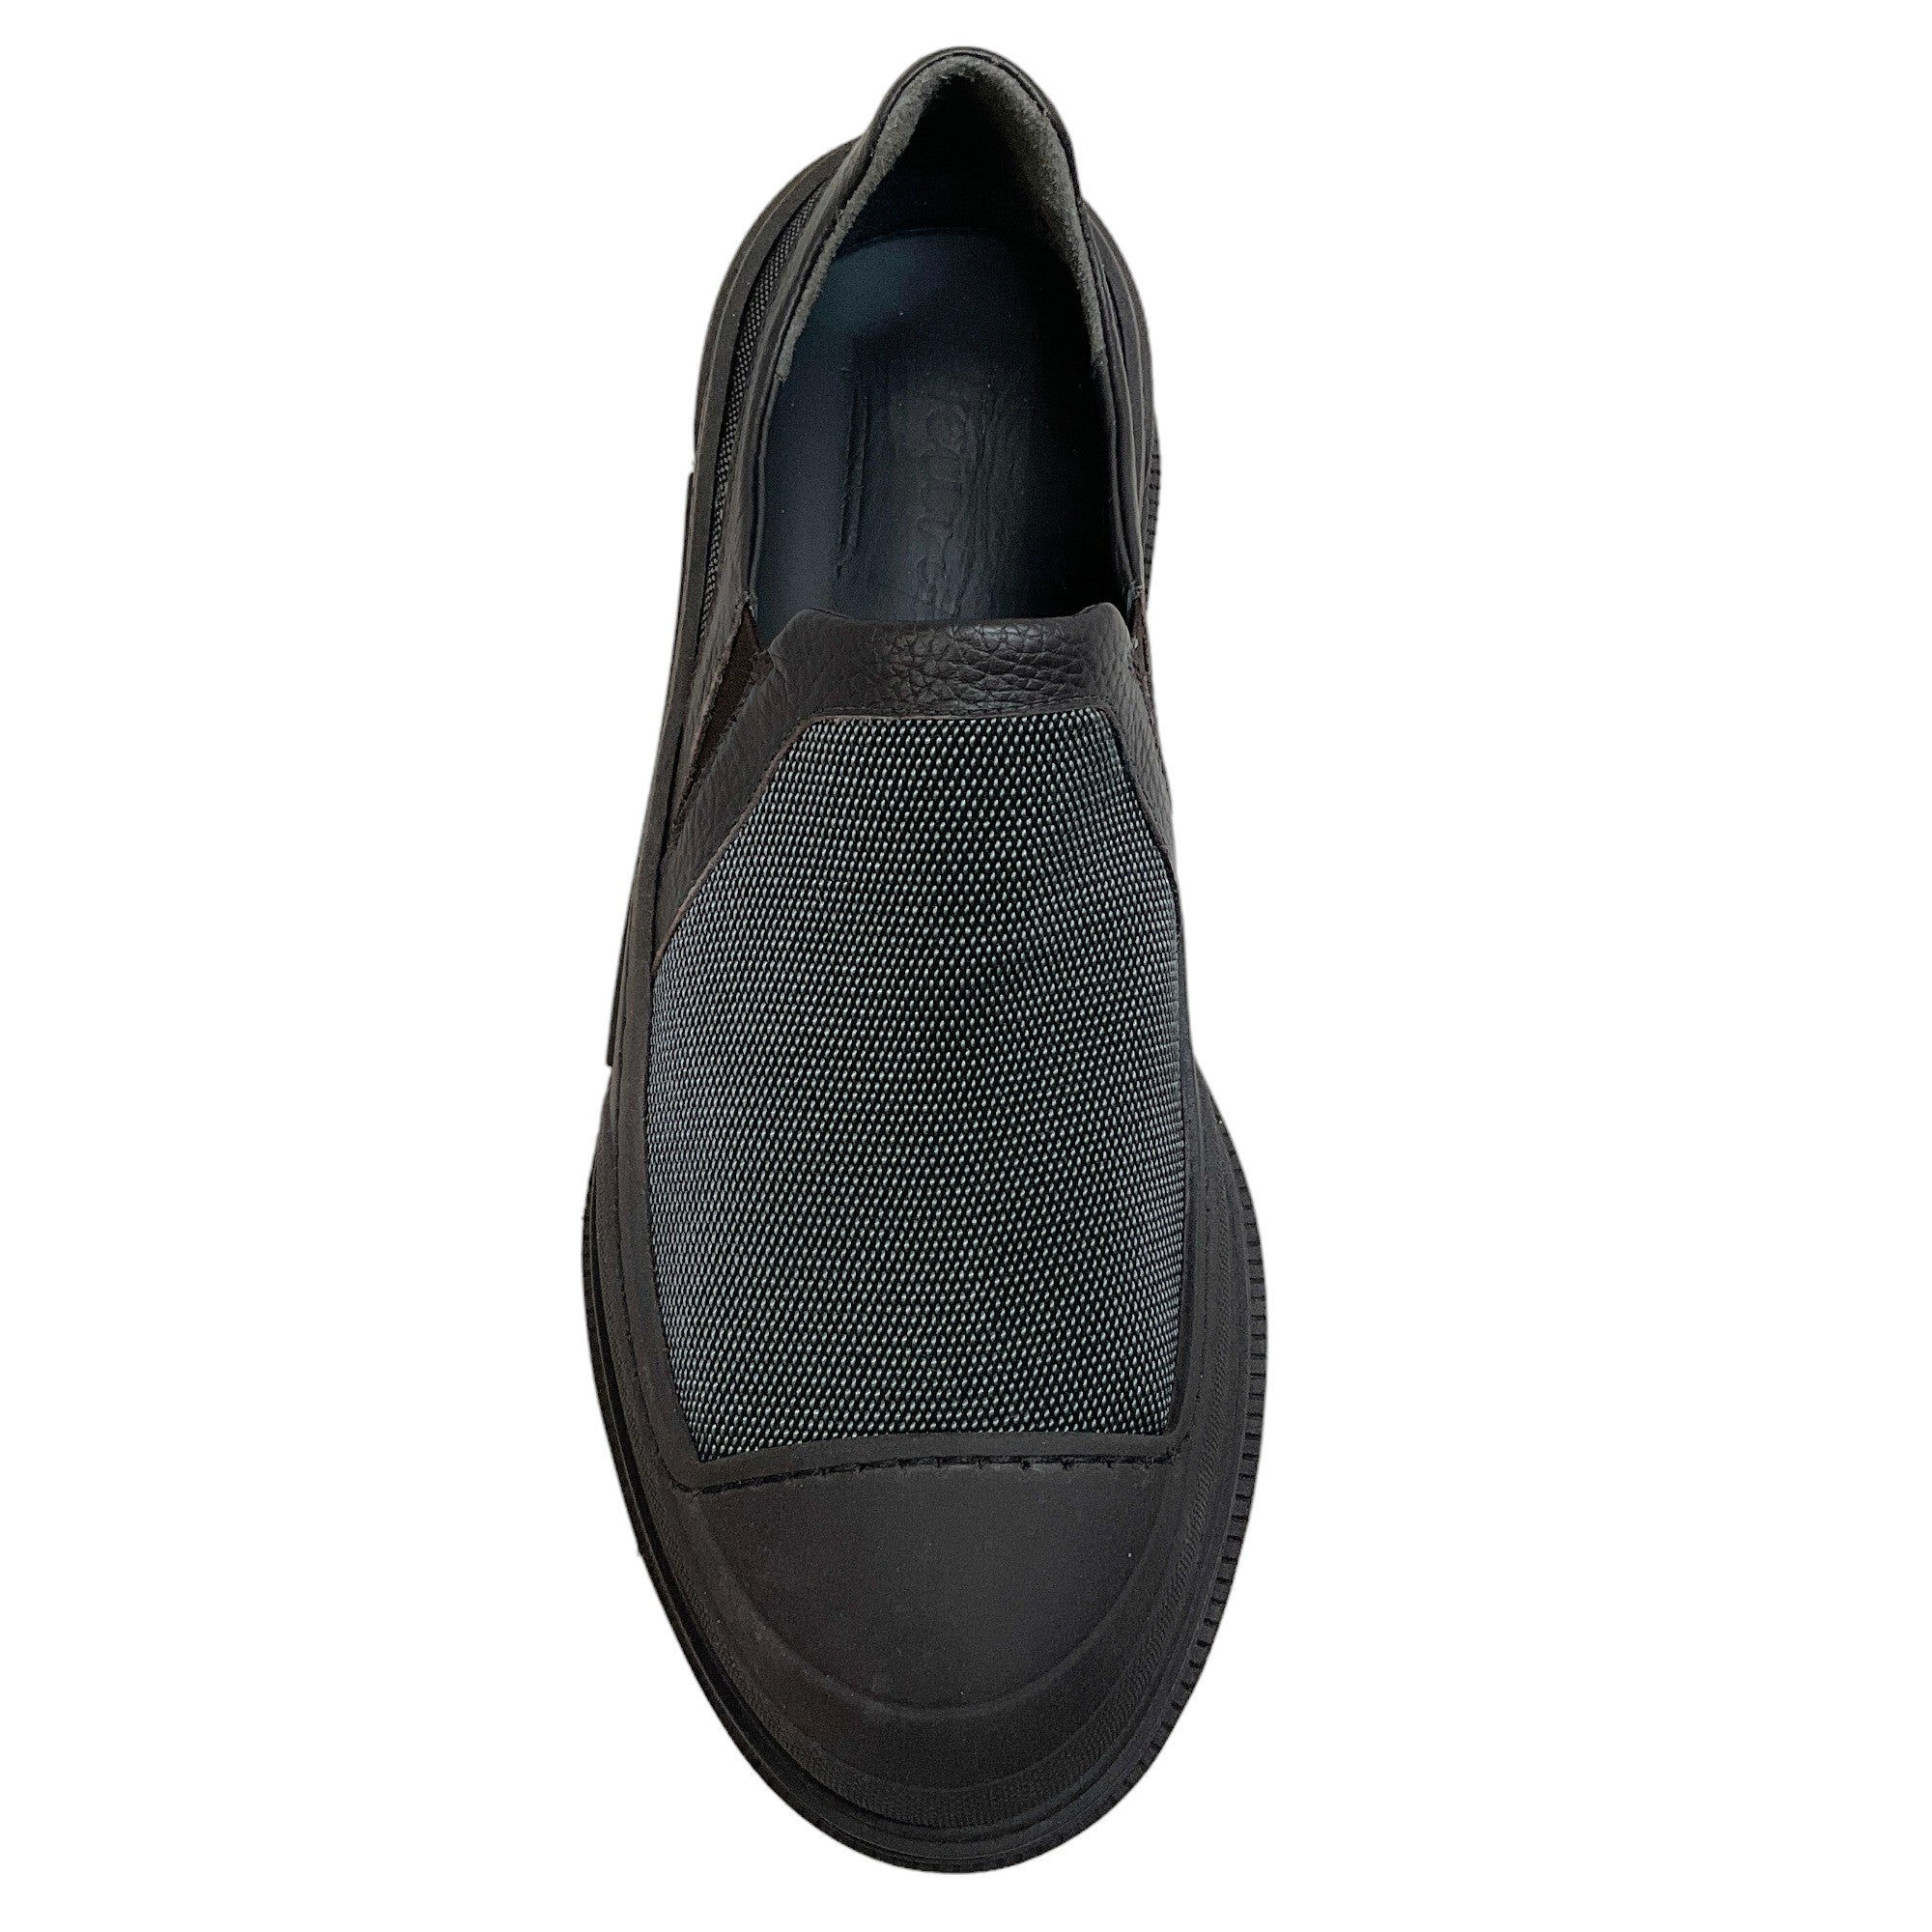 Henry Beguelin Brown Pantofola Carbone Slip On Shoes